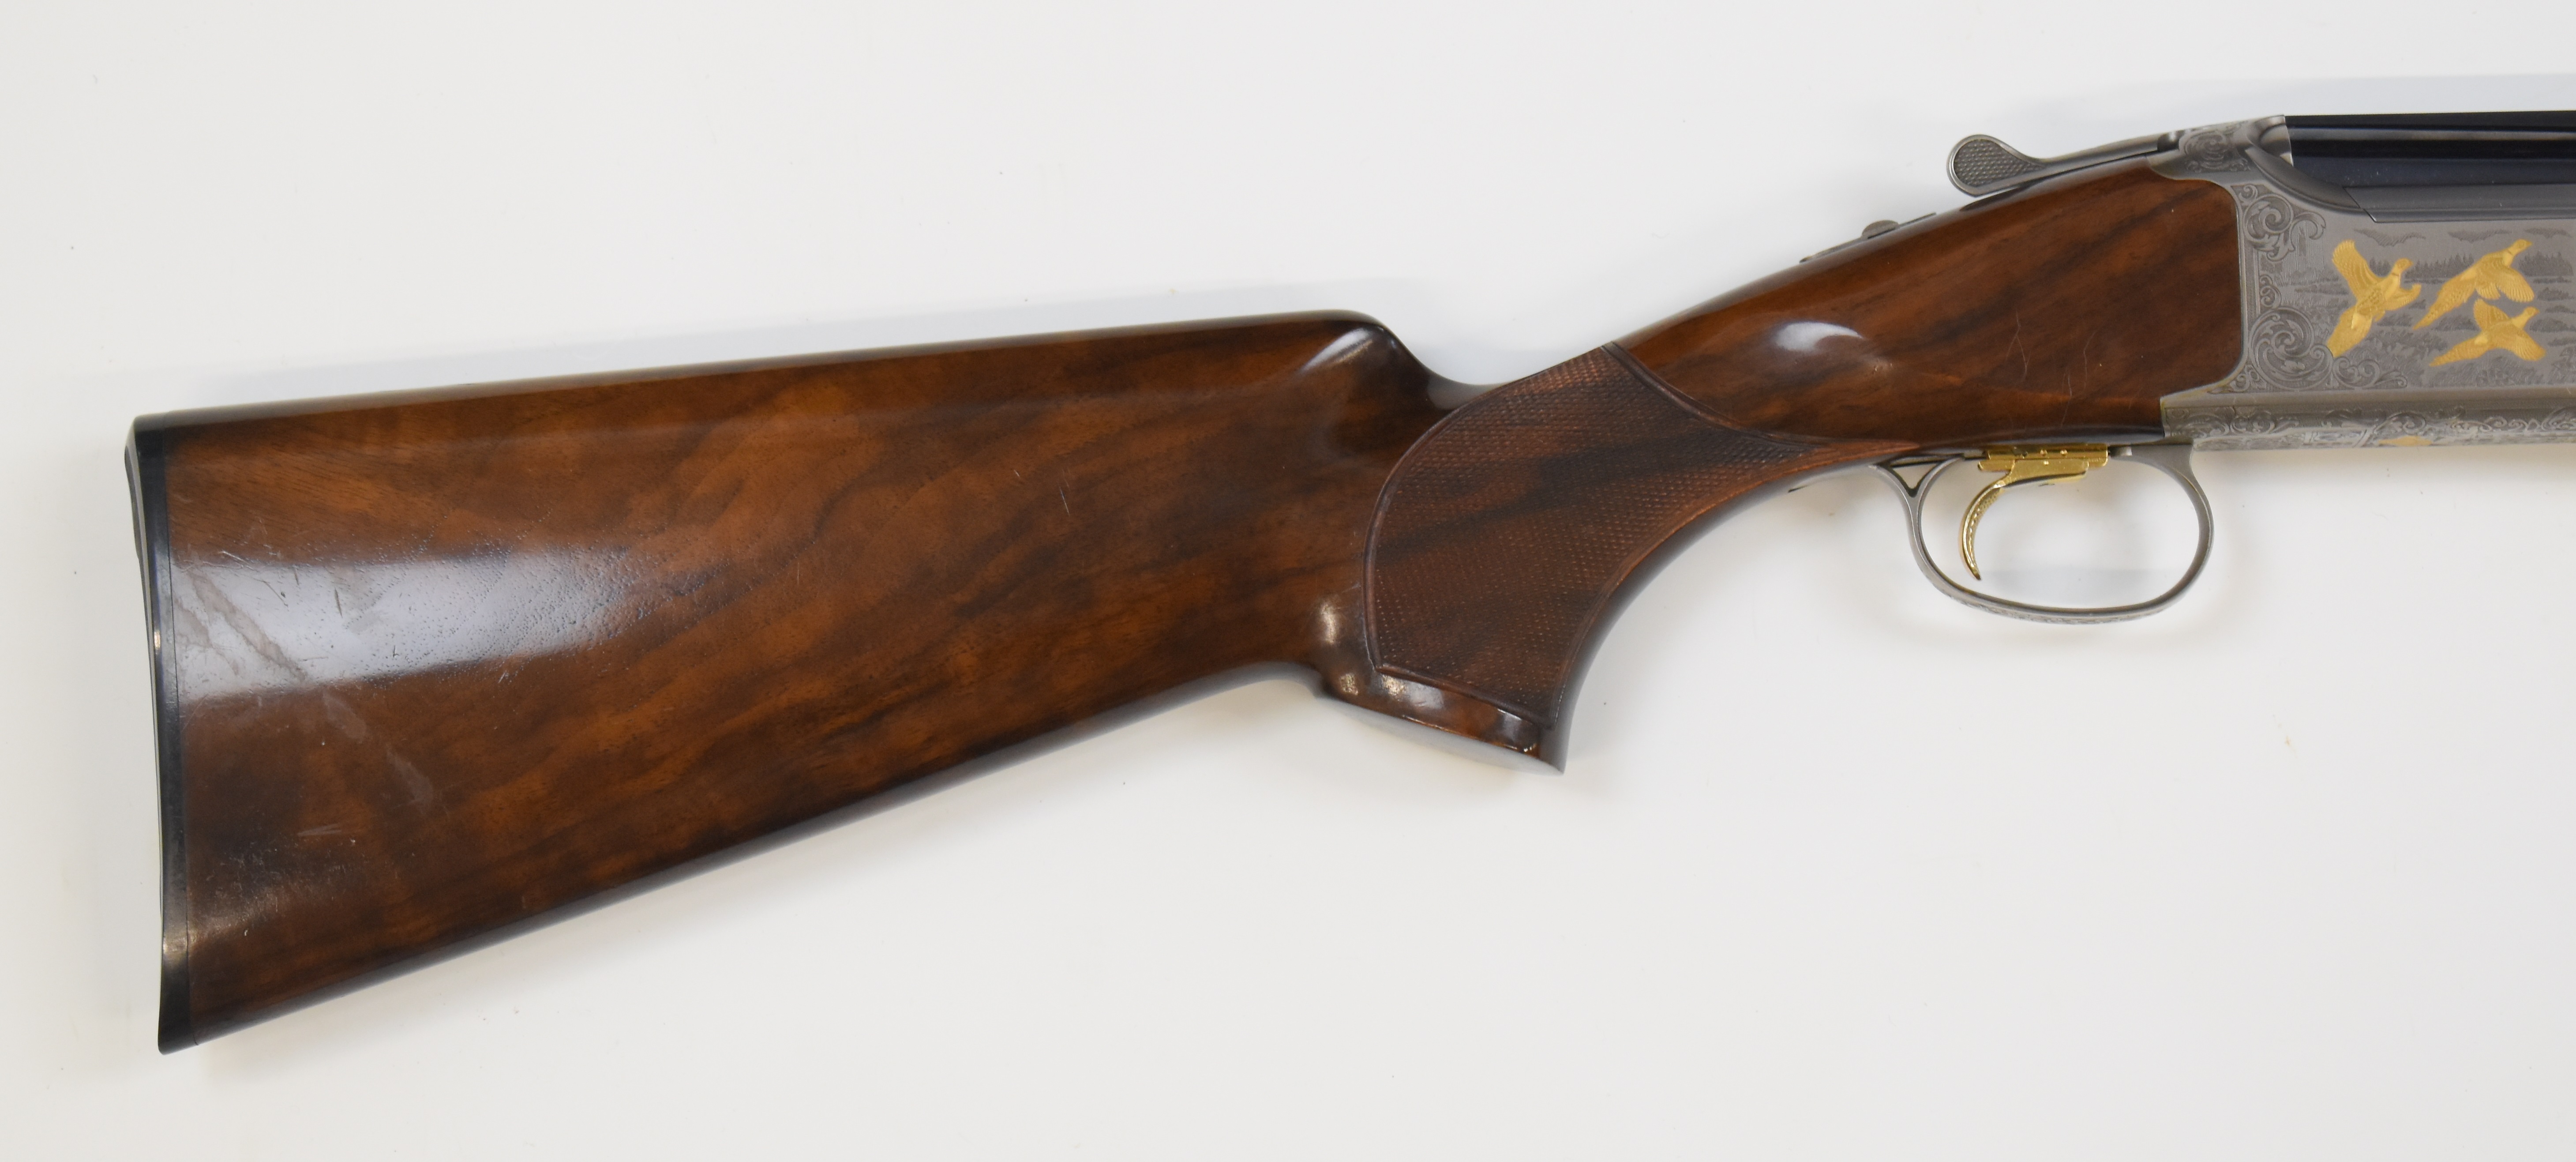 Browning B525 Ultimate 12 bore over and under ejector shotgun with gold engraving of birds - Image 3 of 12